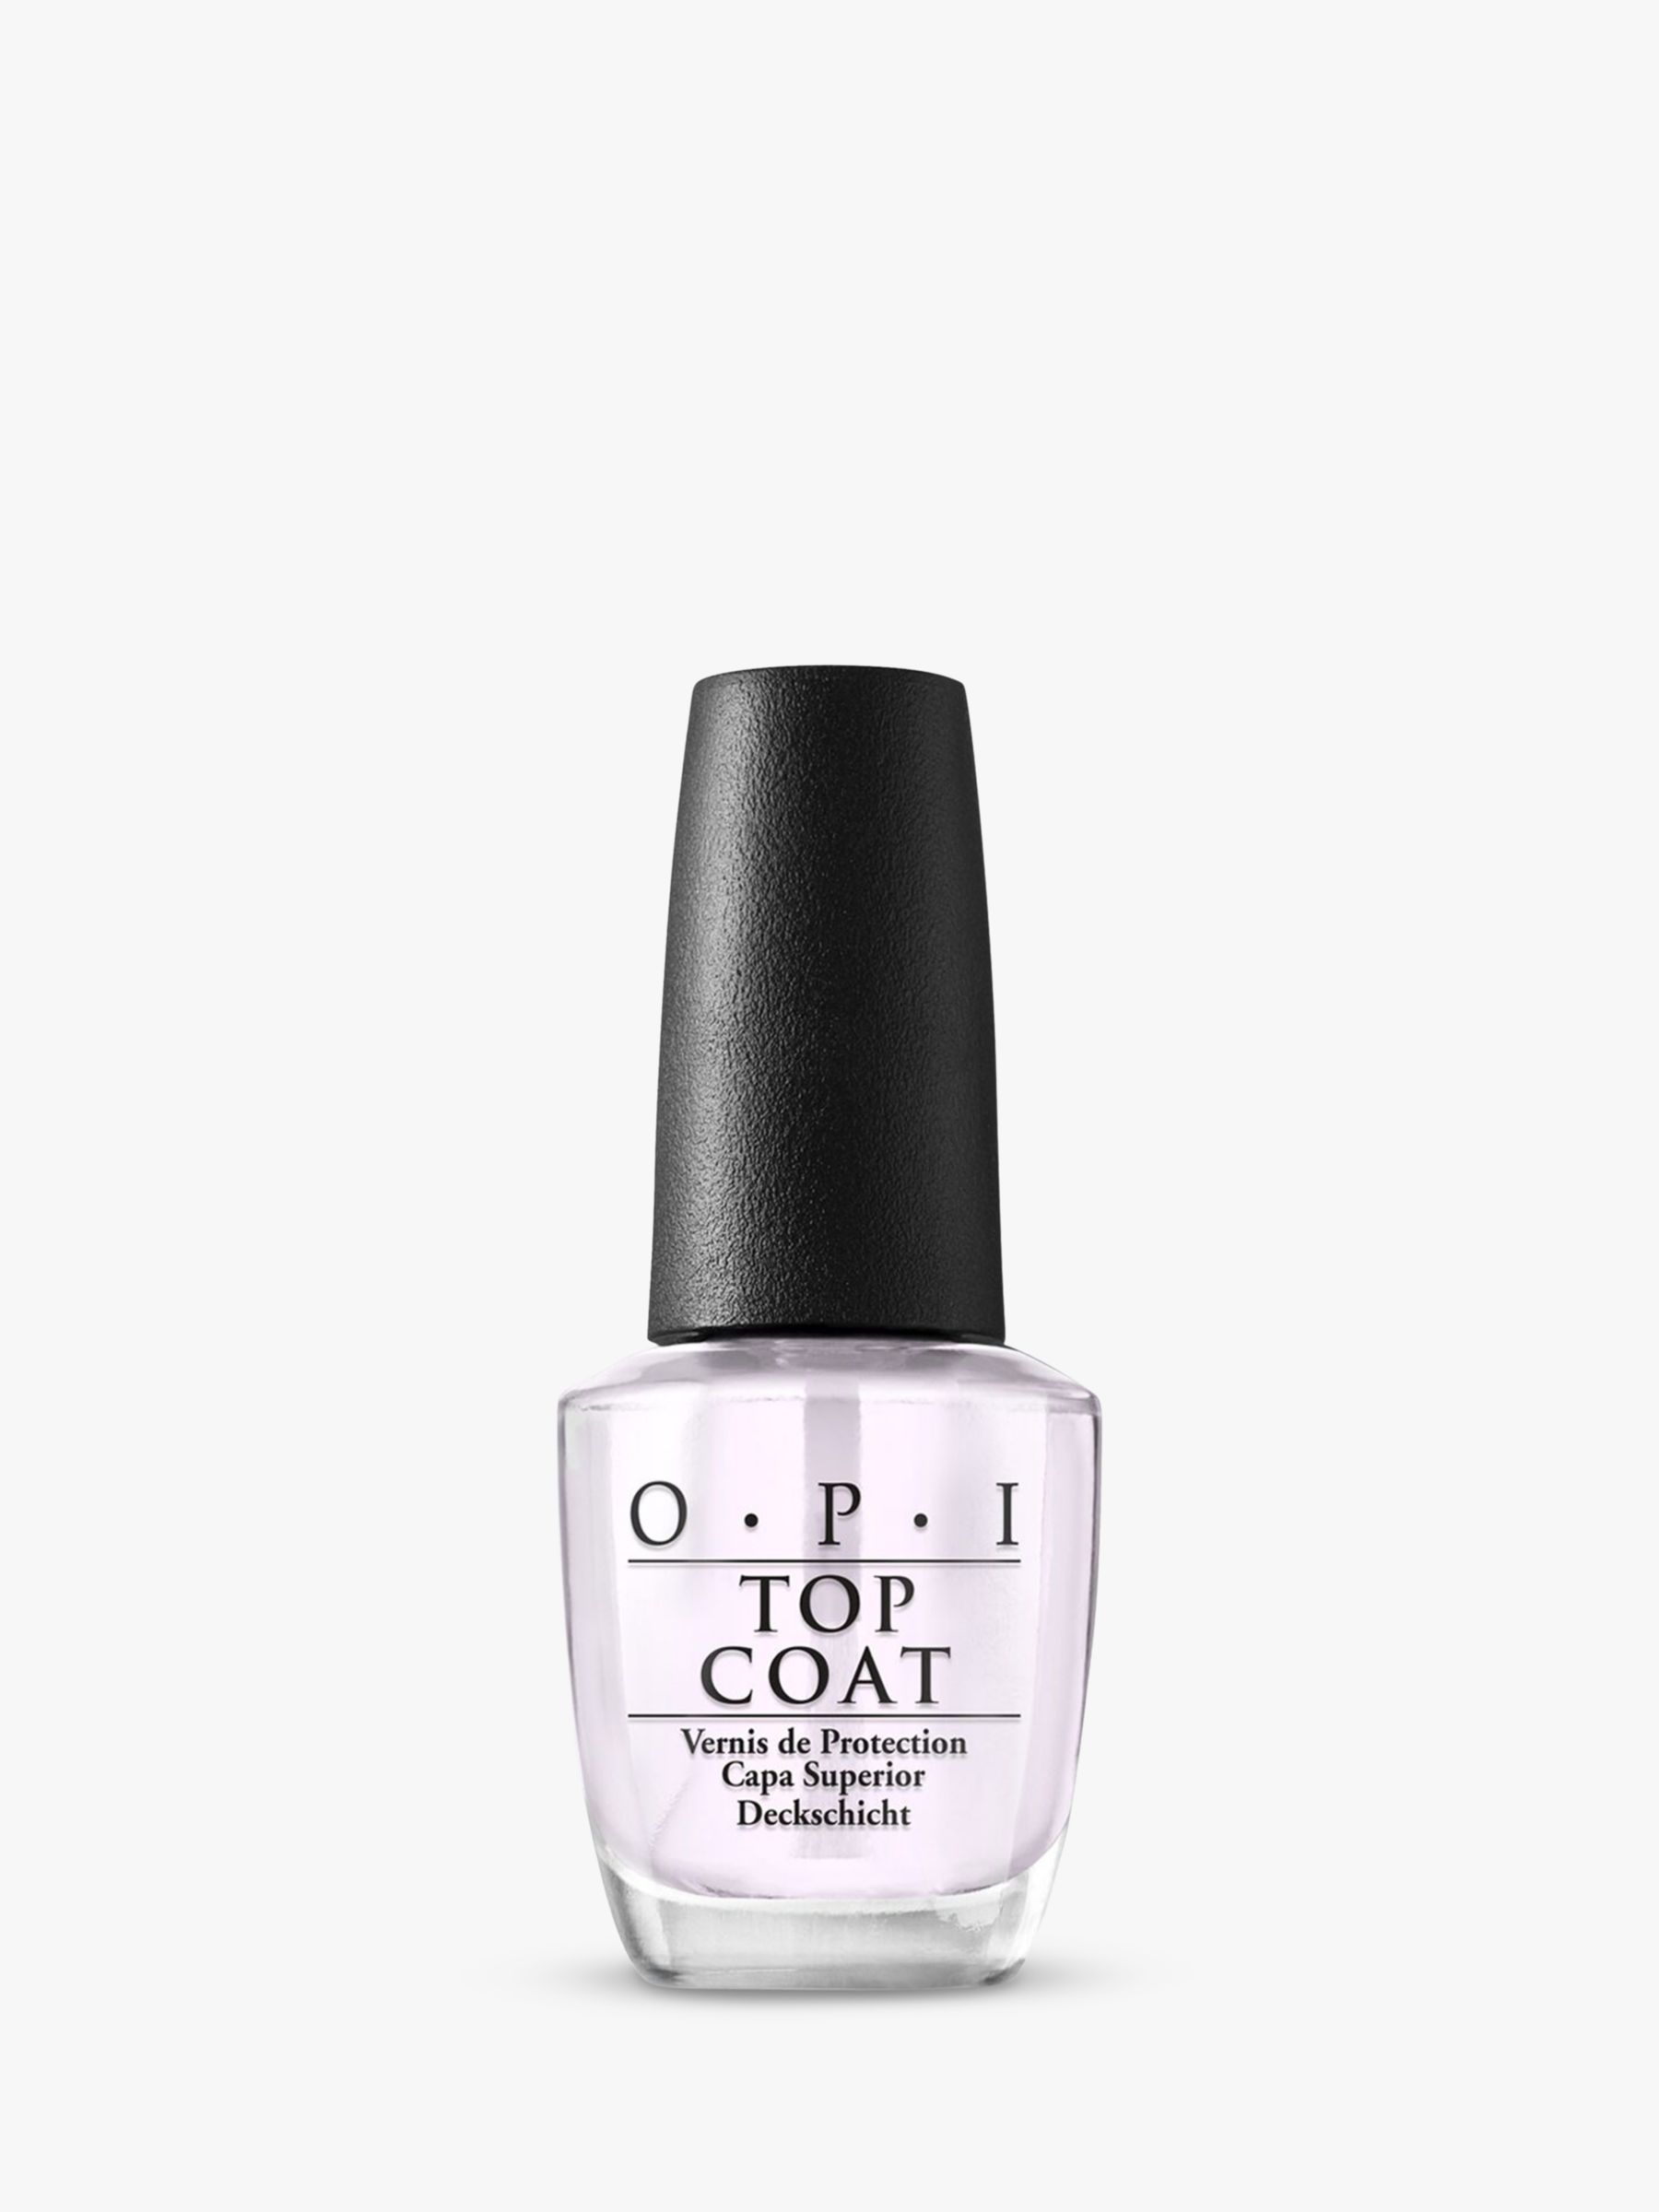 OPI Nail Lacquer - This Cost Me a Mint – Fraser Nails & Beauty Supply